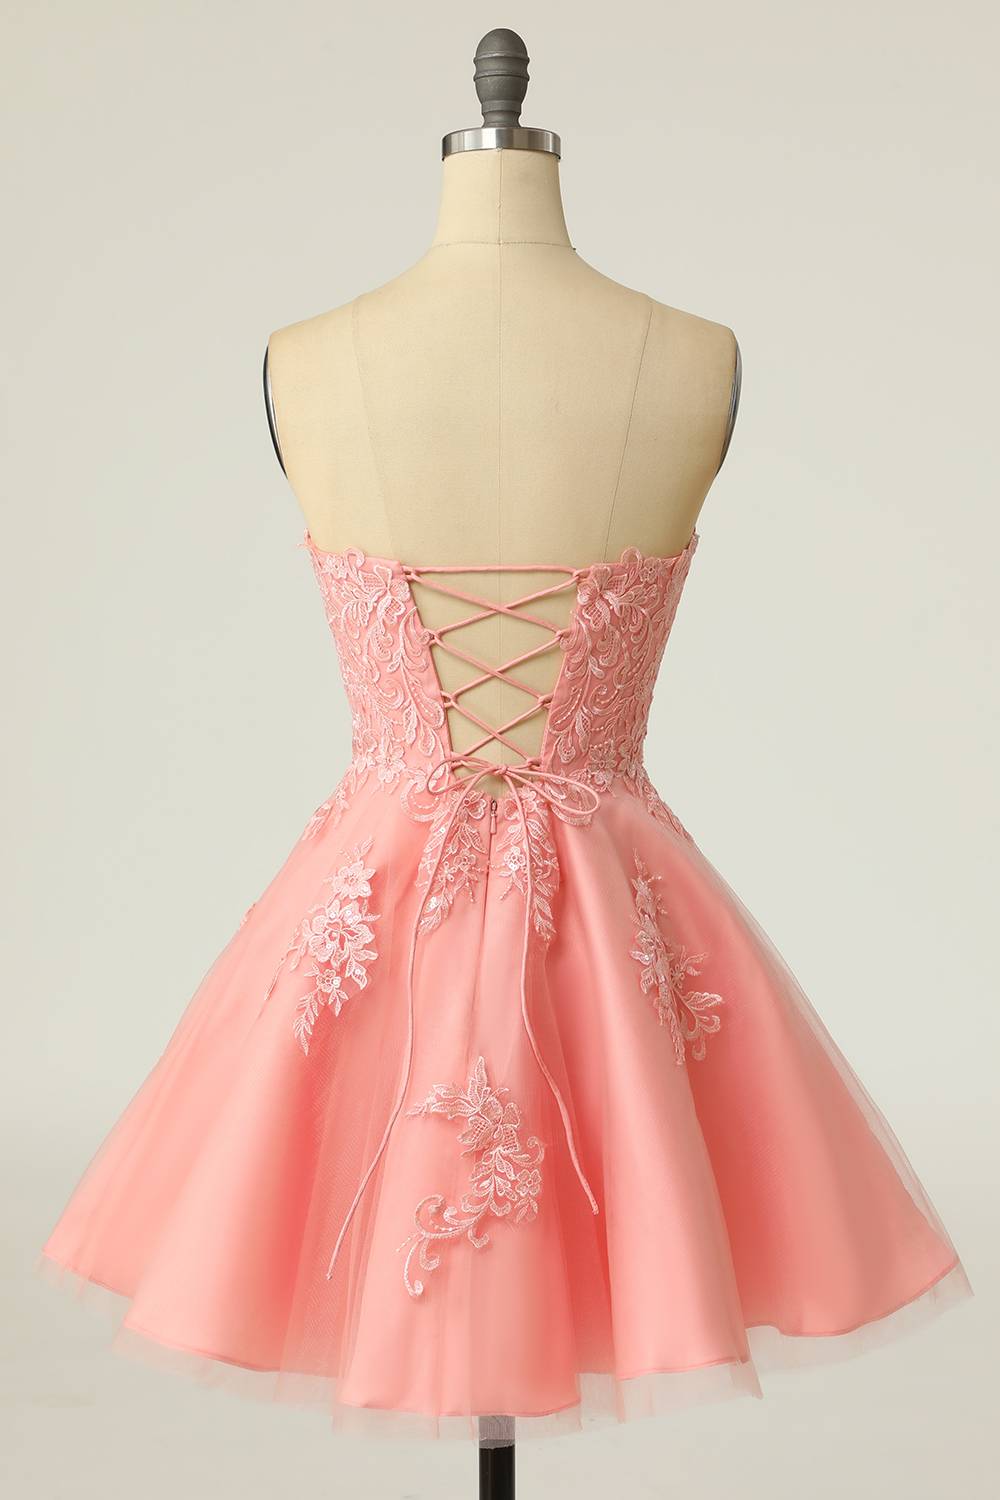 Evening Dresses For Over 46, Strapless Pink Lace Appliues A-Line Short Party Dress